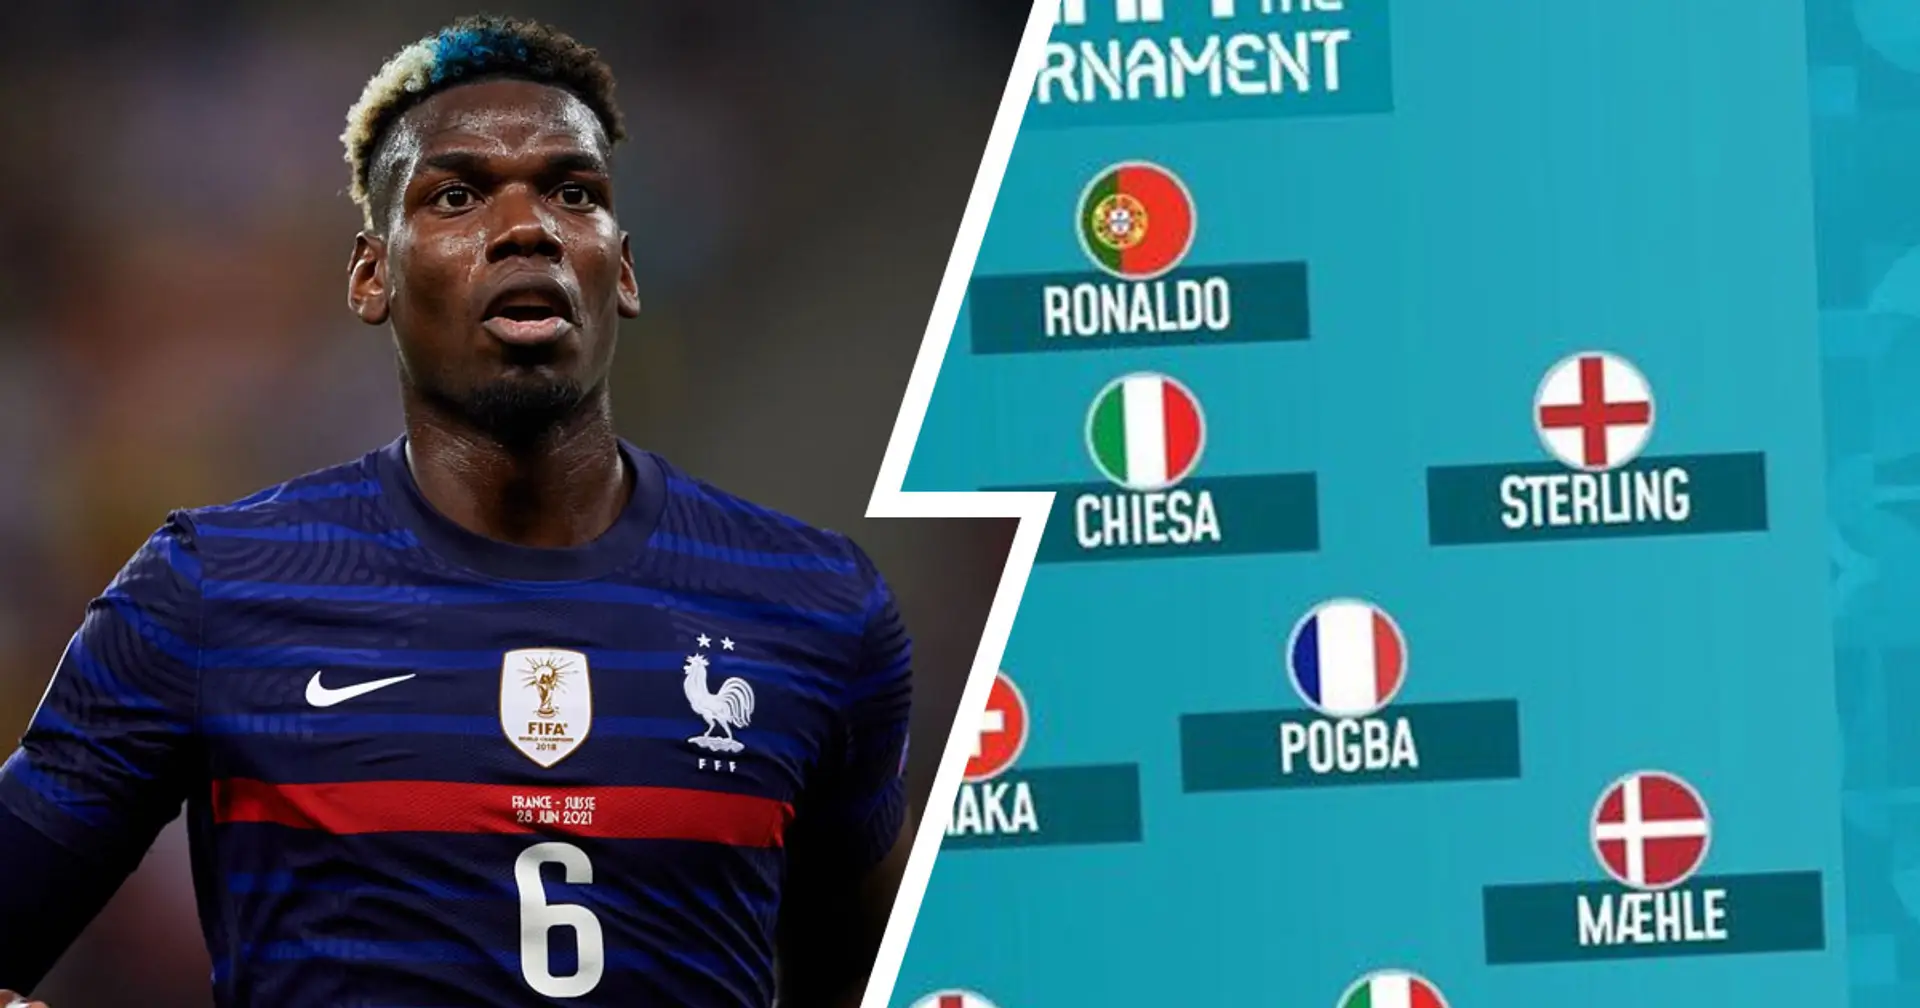 3 Man United stars included in UEFA Euro 2020 Team of the Tournament